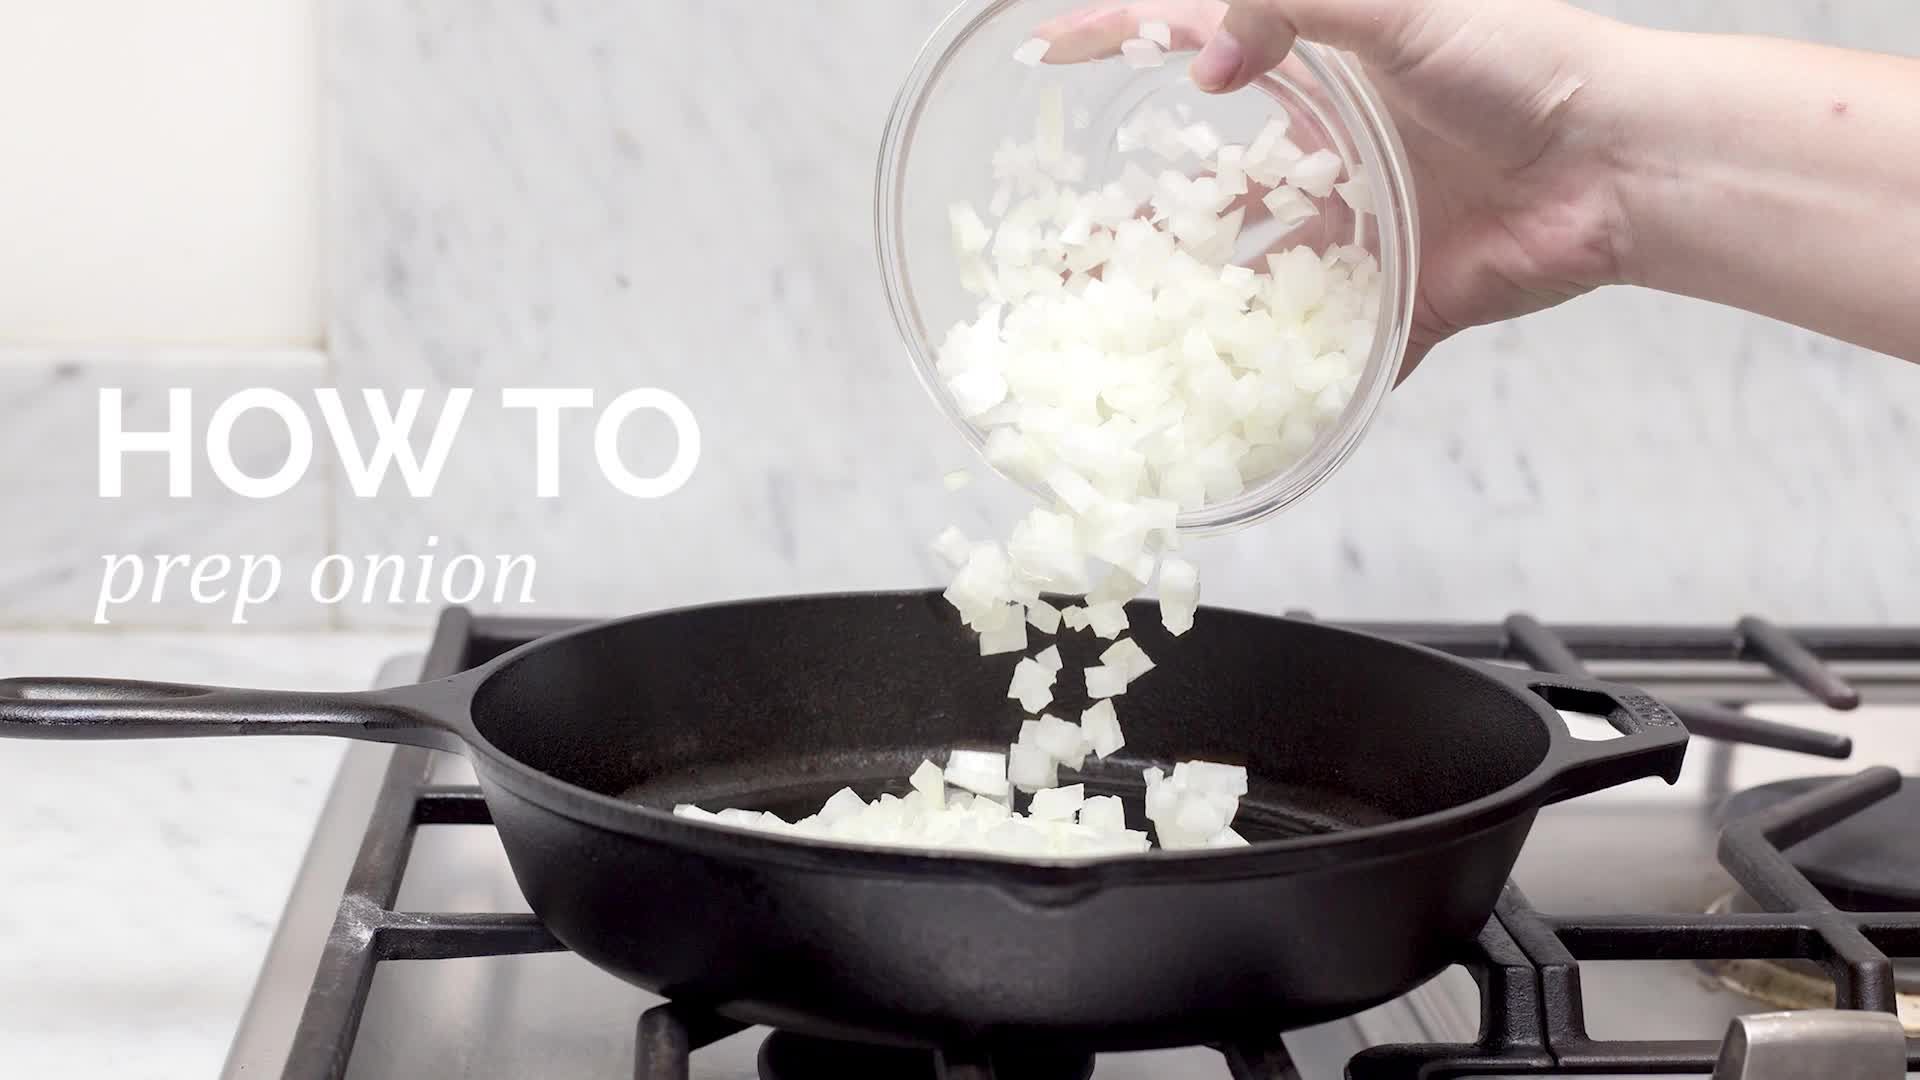 How to : Prep onion